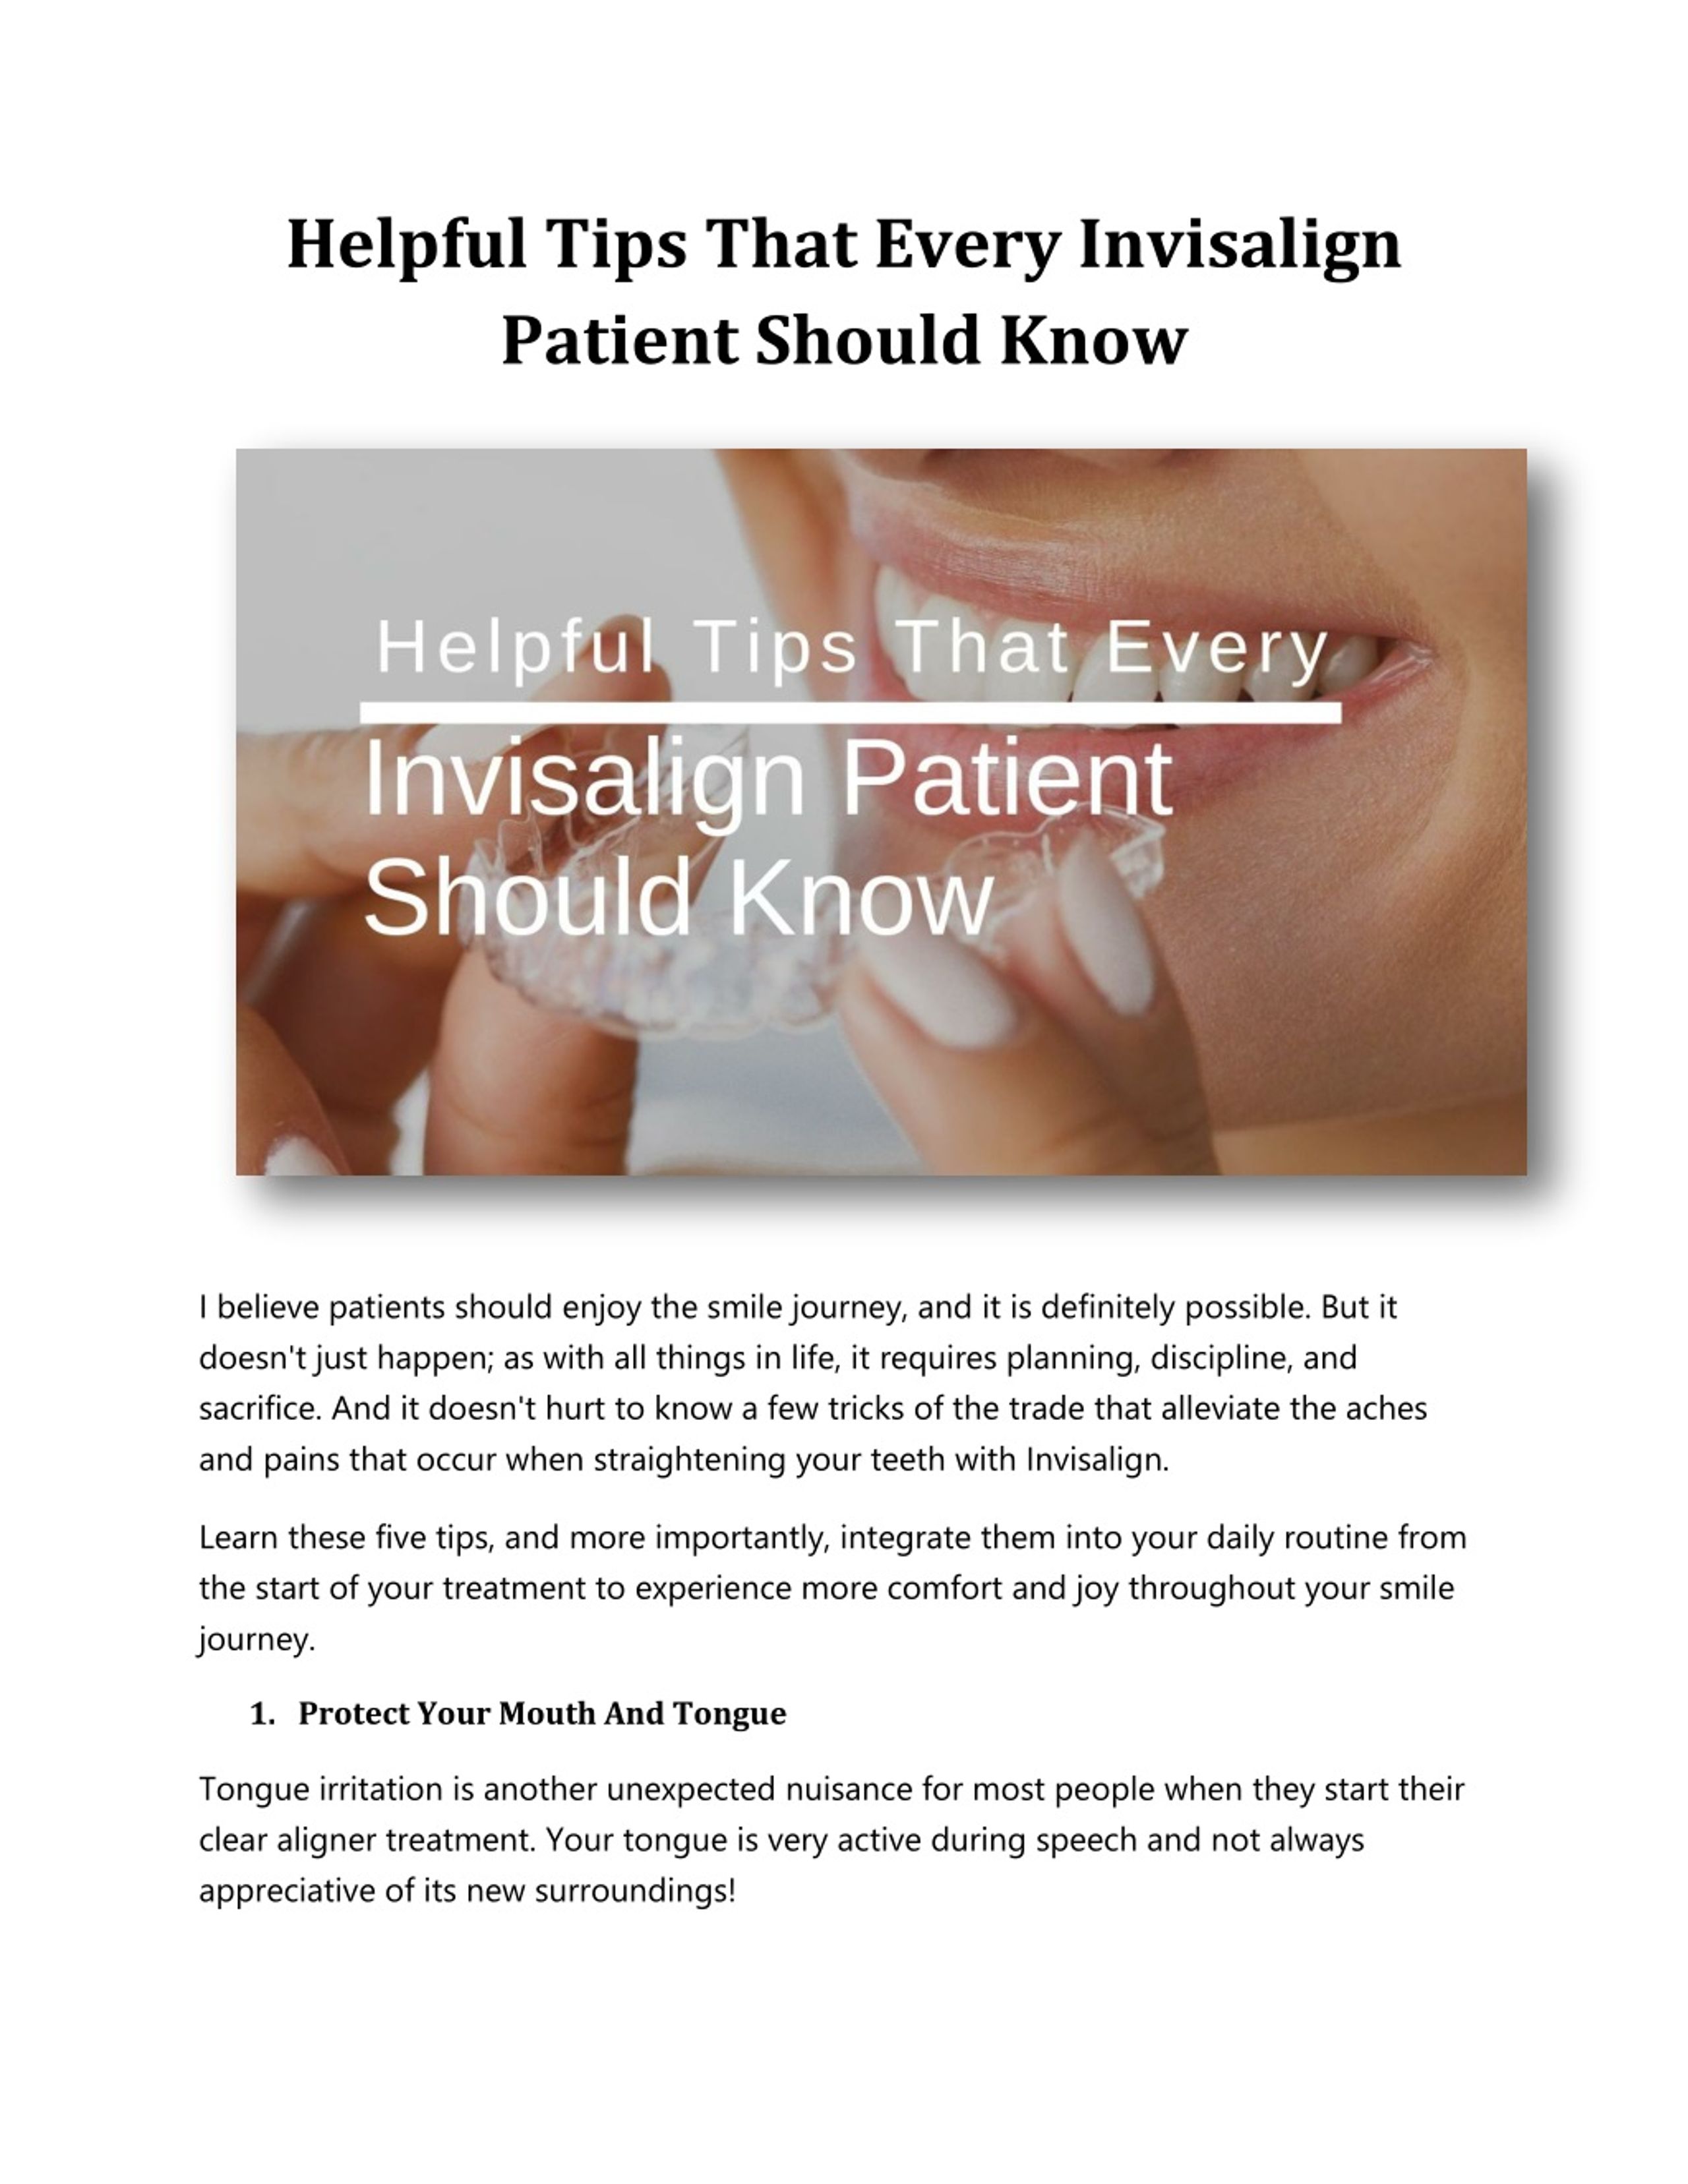 Ppt Helpful Tips That Every Invisalign Patient Should Know Powerpoint Presentation Id8160973